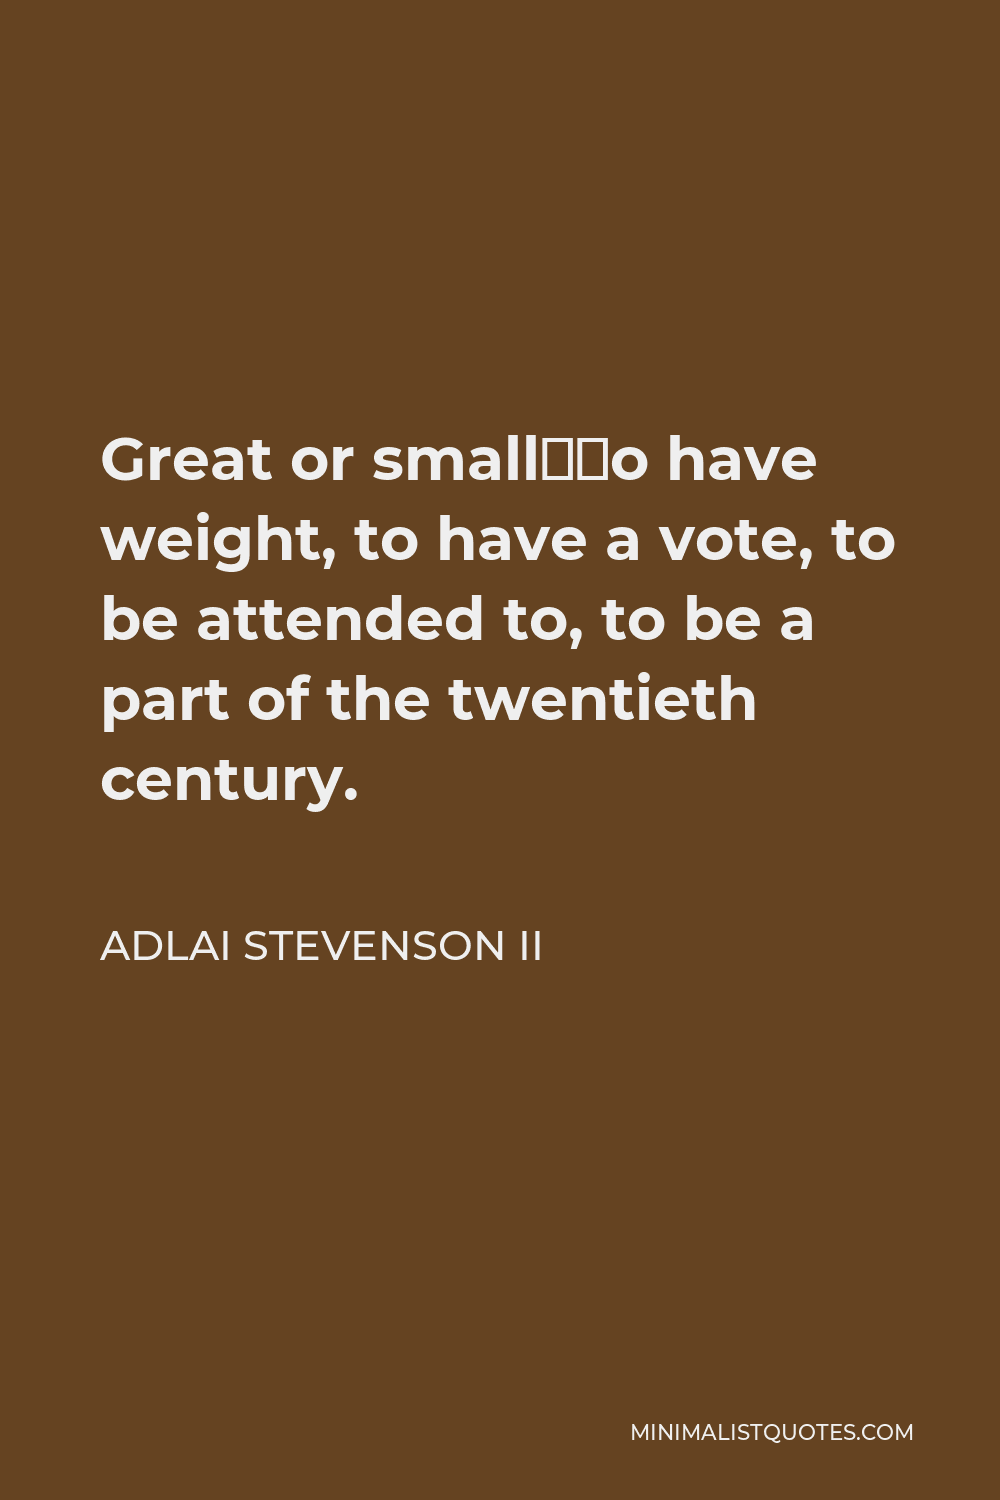 Adlai Stevenson II Quote - Great or small–to have weight, to have a vote, to be attended to, to be a part of the twentieth century.